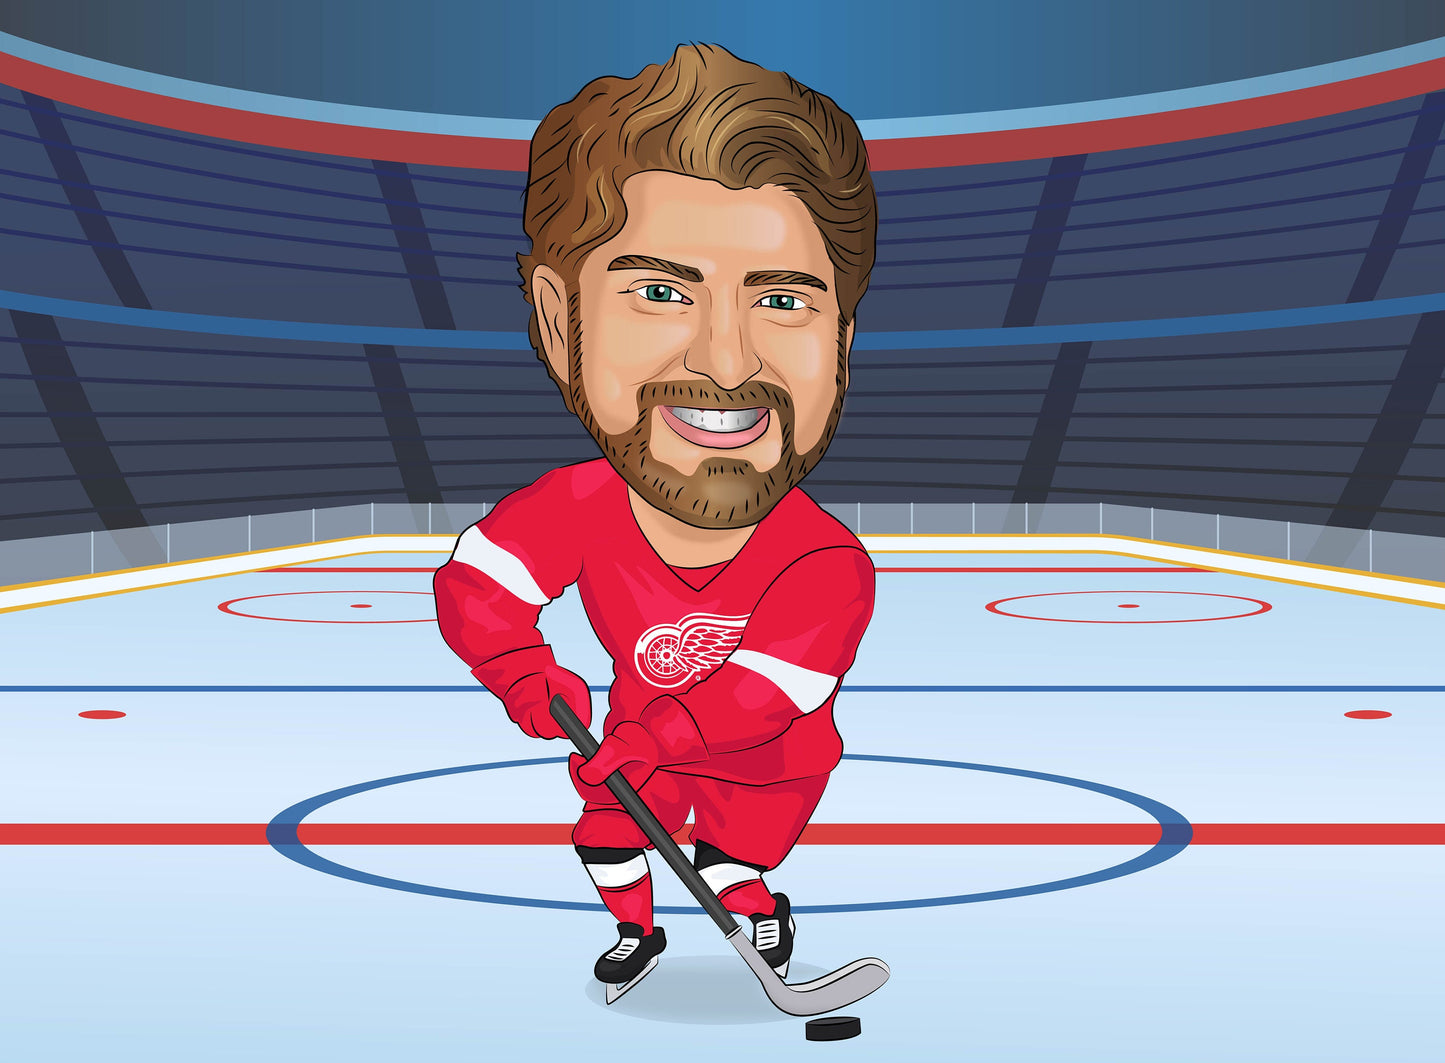 Hockey Player Gift - Custom Caricature Portrait From Your Photo/hockey coach gift